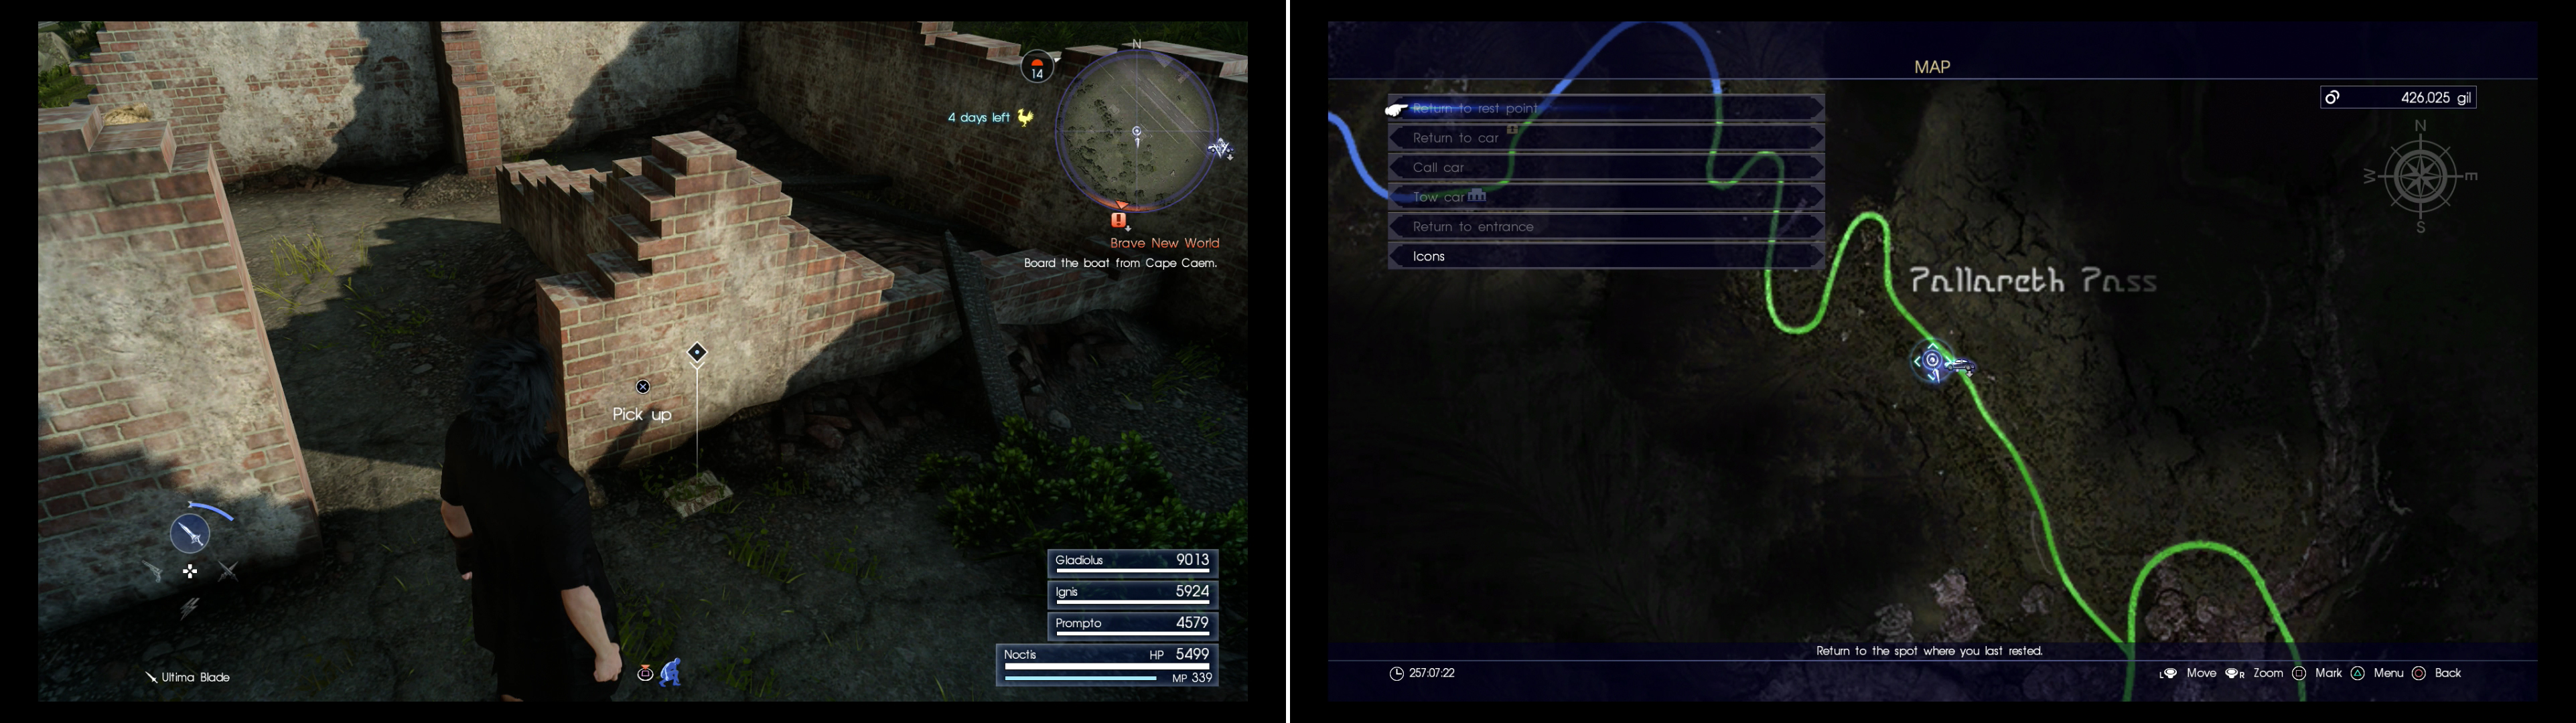 Search some ruins near Apline Stable Parking Spot to find Mystery Map XI (left) at the marked location on the map (right).